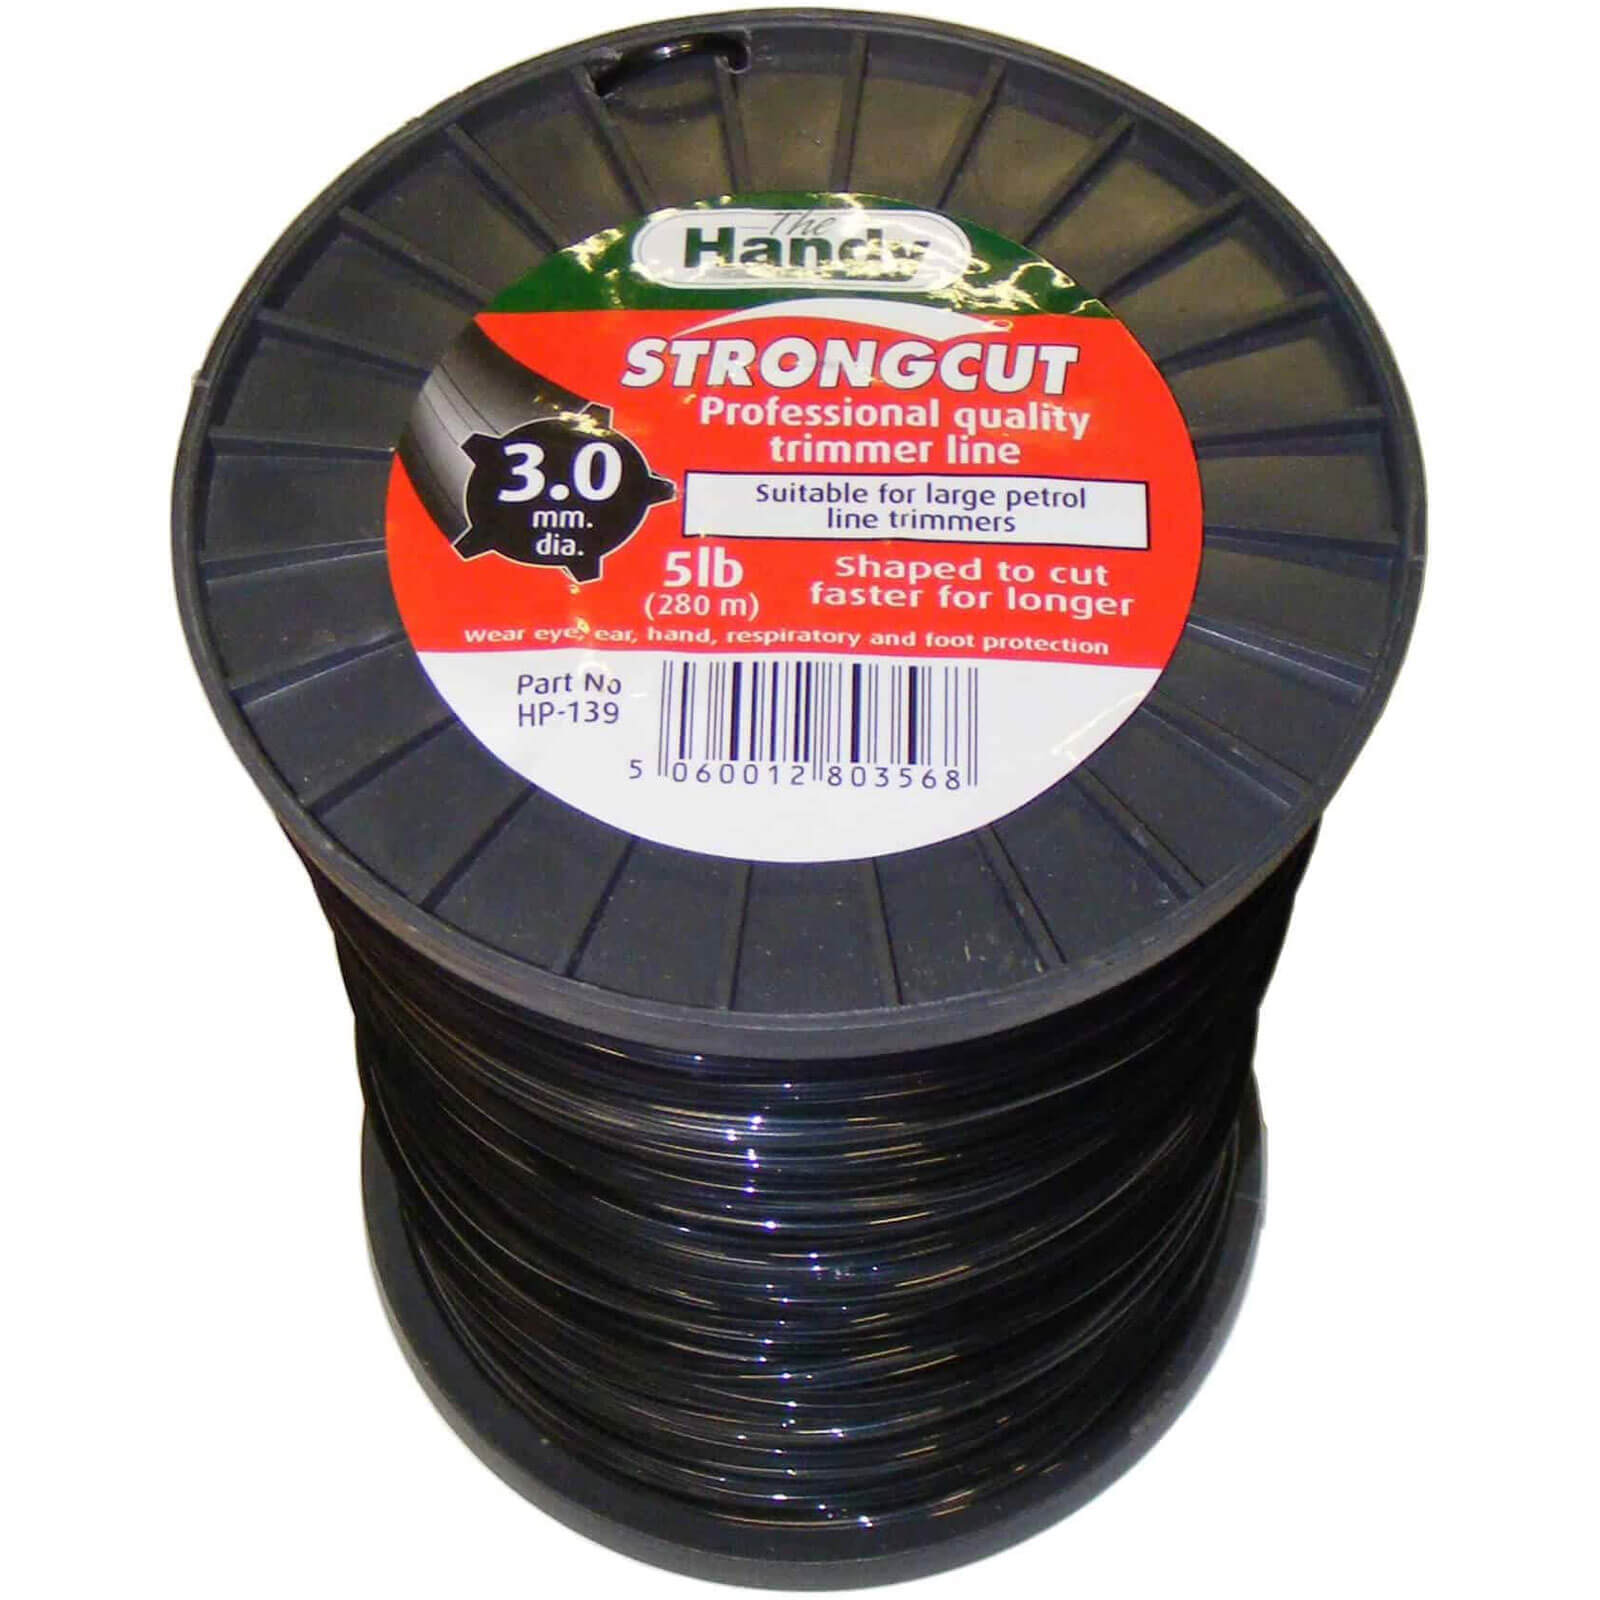 Image of Handy Professional Nylon Grass Trimmer Line 3mm 280m